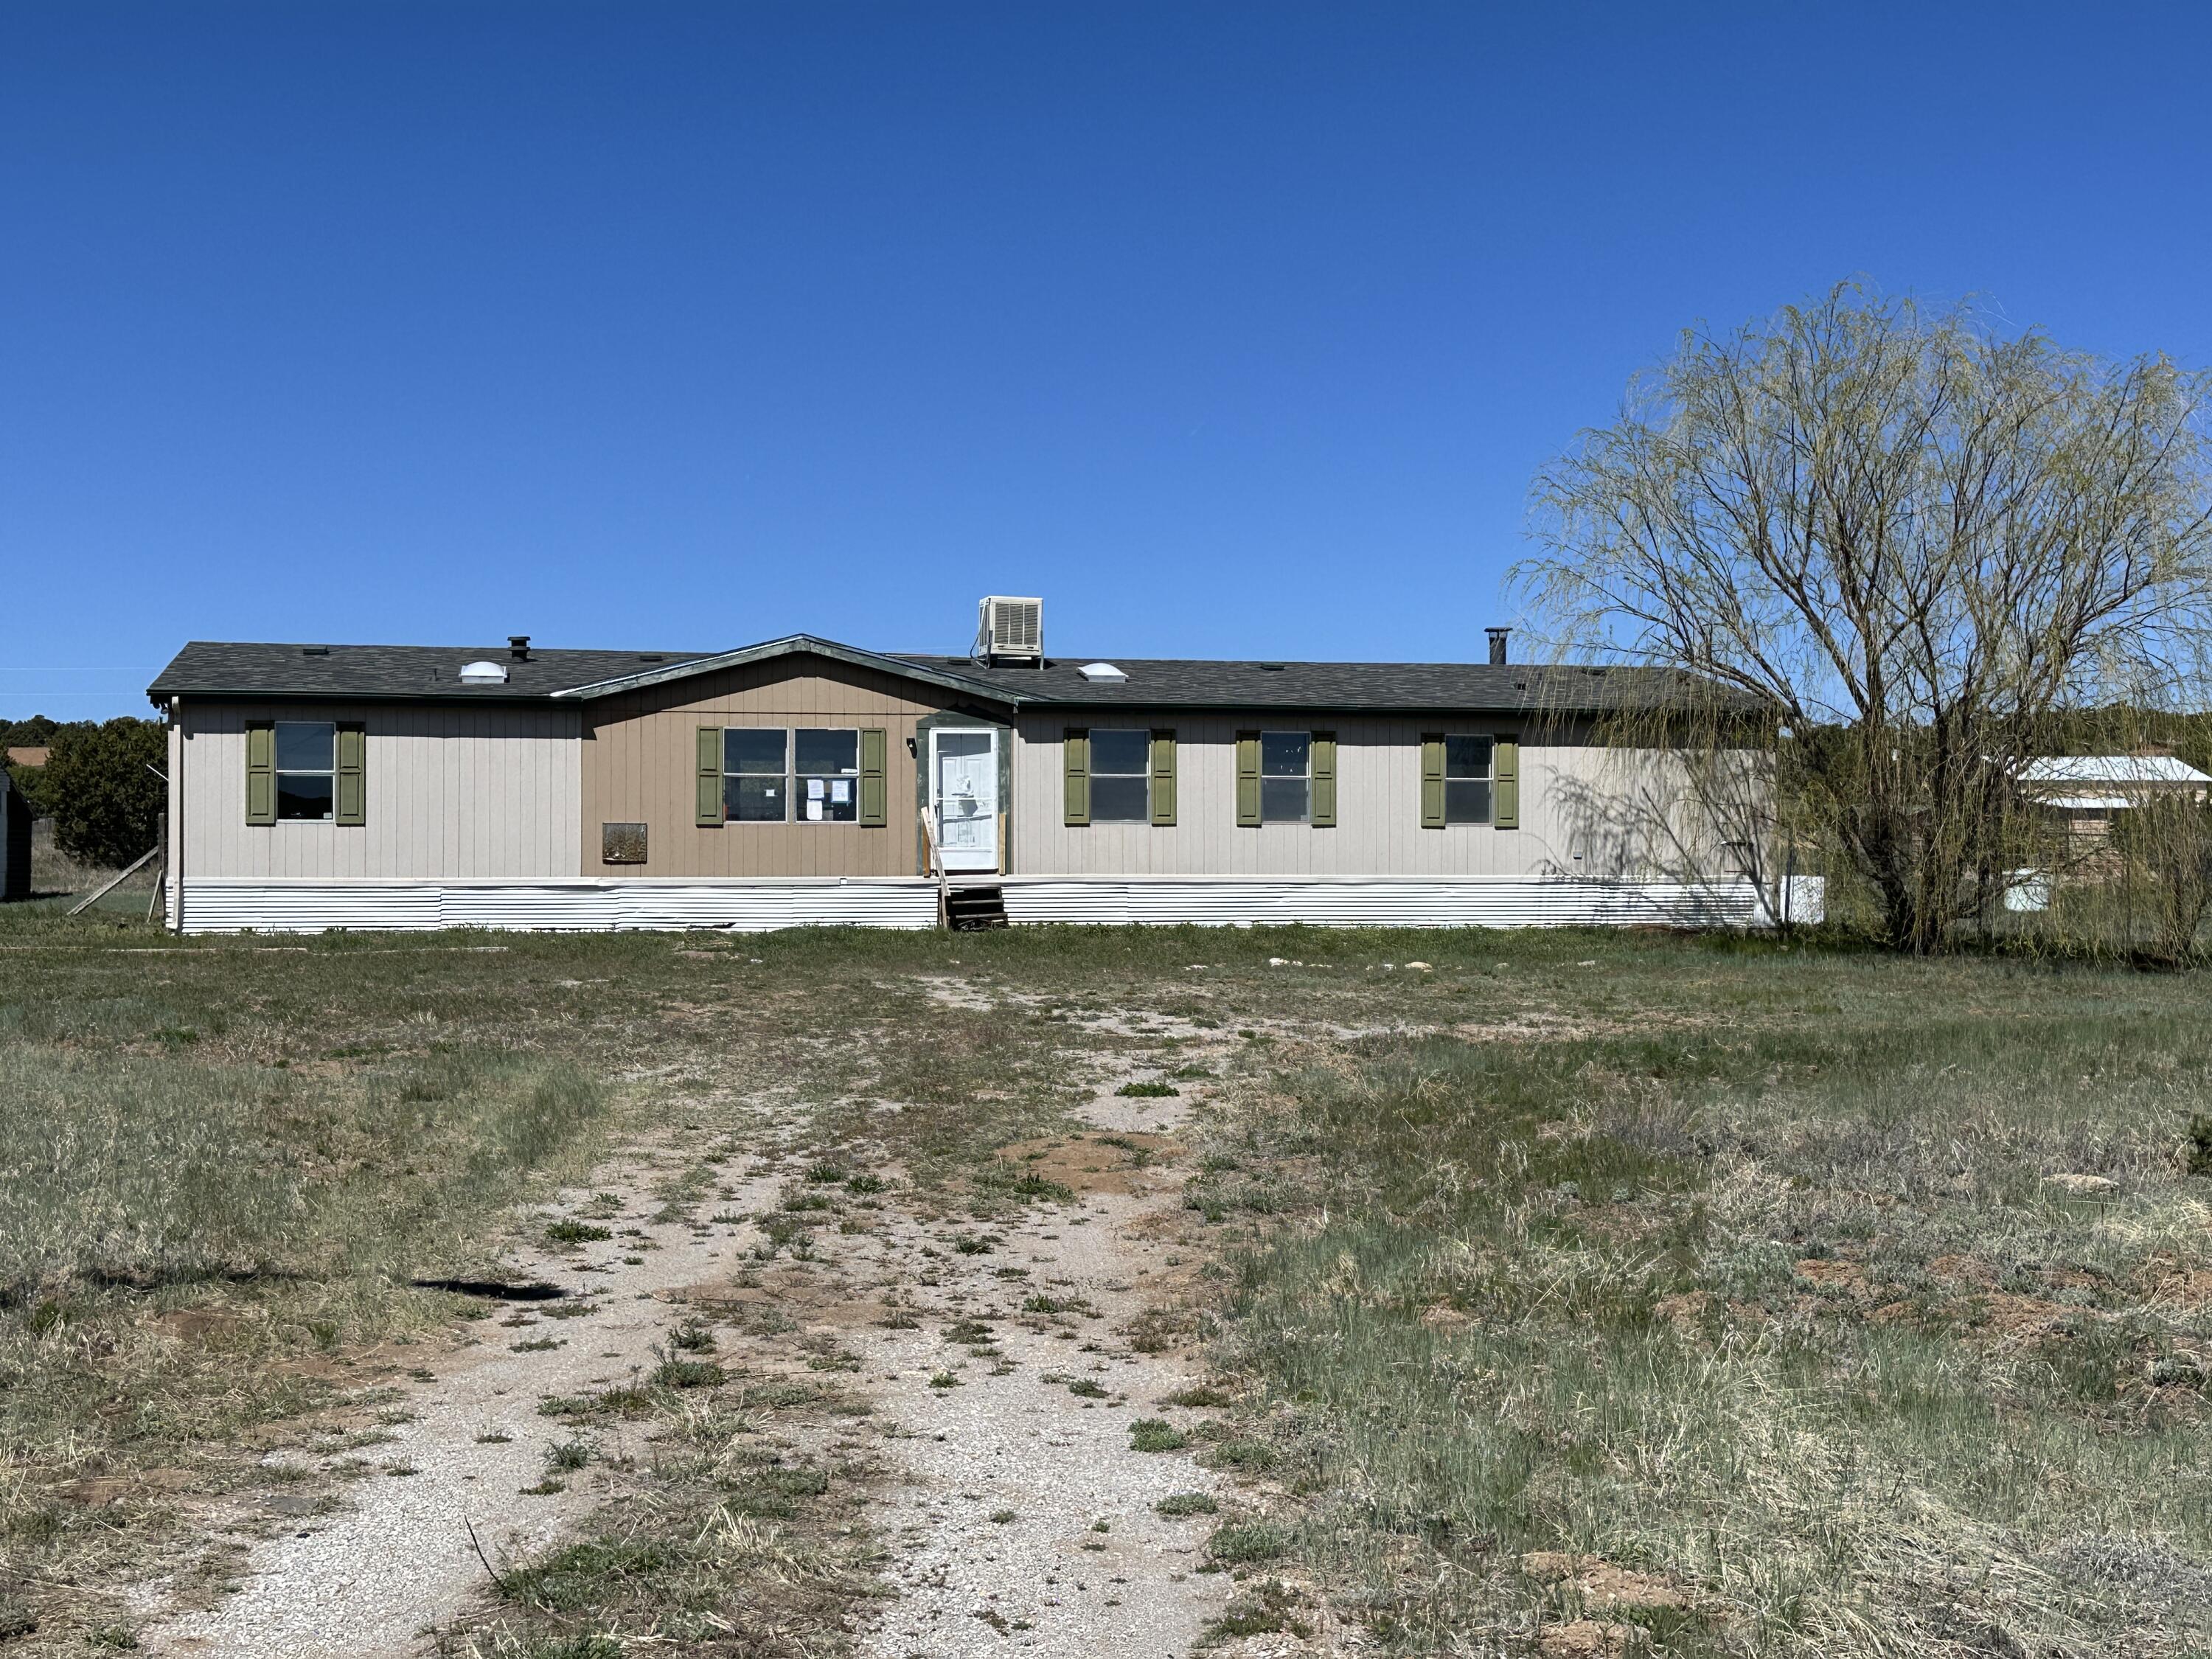 This double wide manufactured home has a large floorplan with 2 living areas, screened back porch, office off primary bedroom, several small barns for animals and sits on a large 2 acre lot. Home is eligible for $100 down payment program if using FHA 203 K Renovation financing.